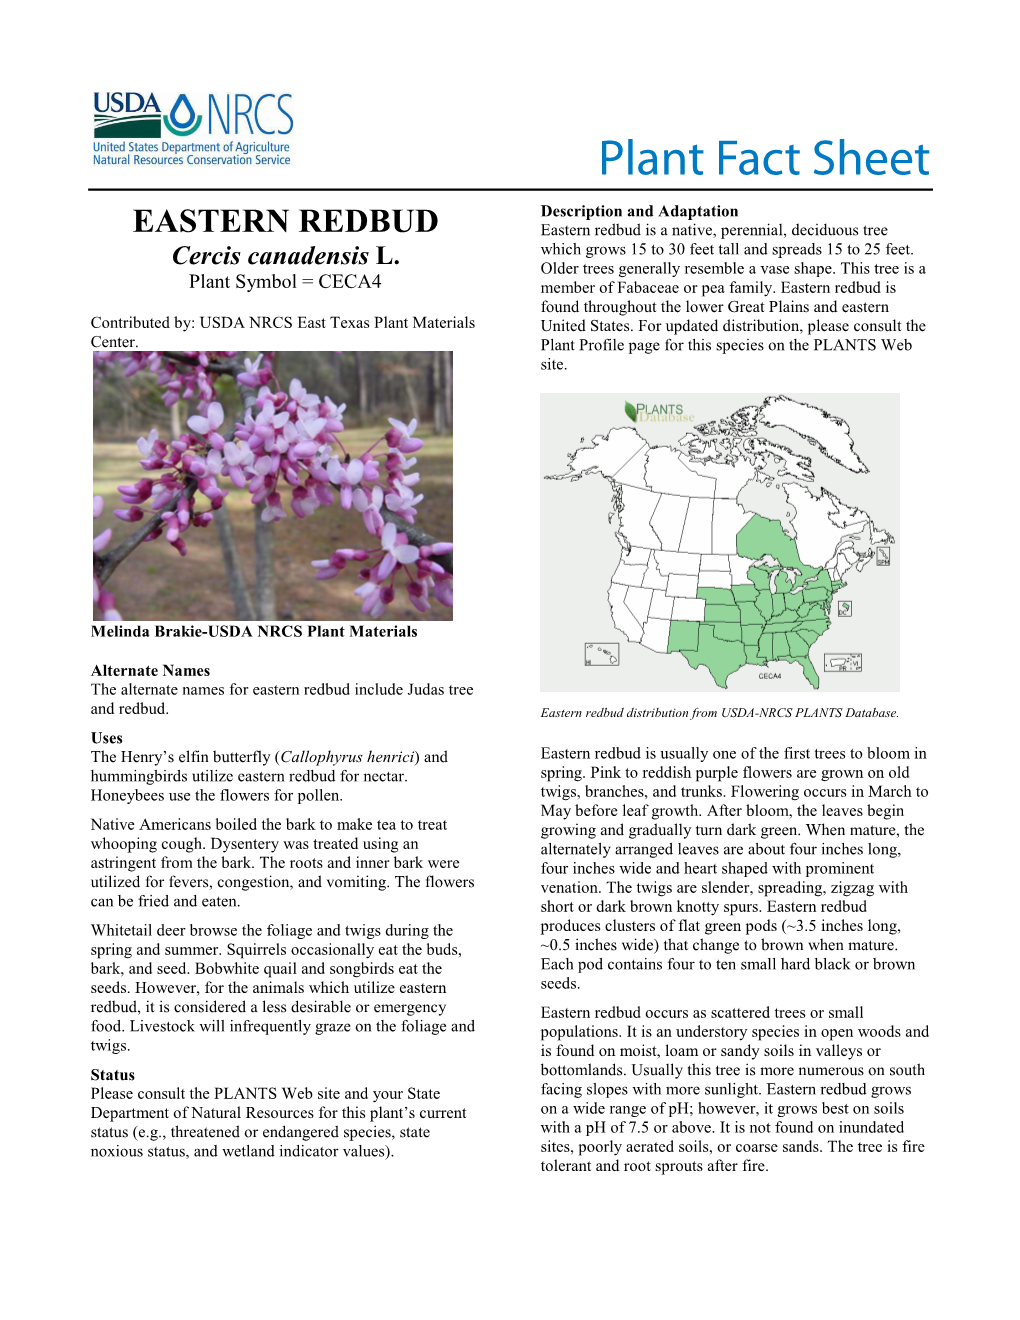 Eastern Redbud (Cercis Canadensis) Plant Fact Sheet